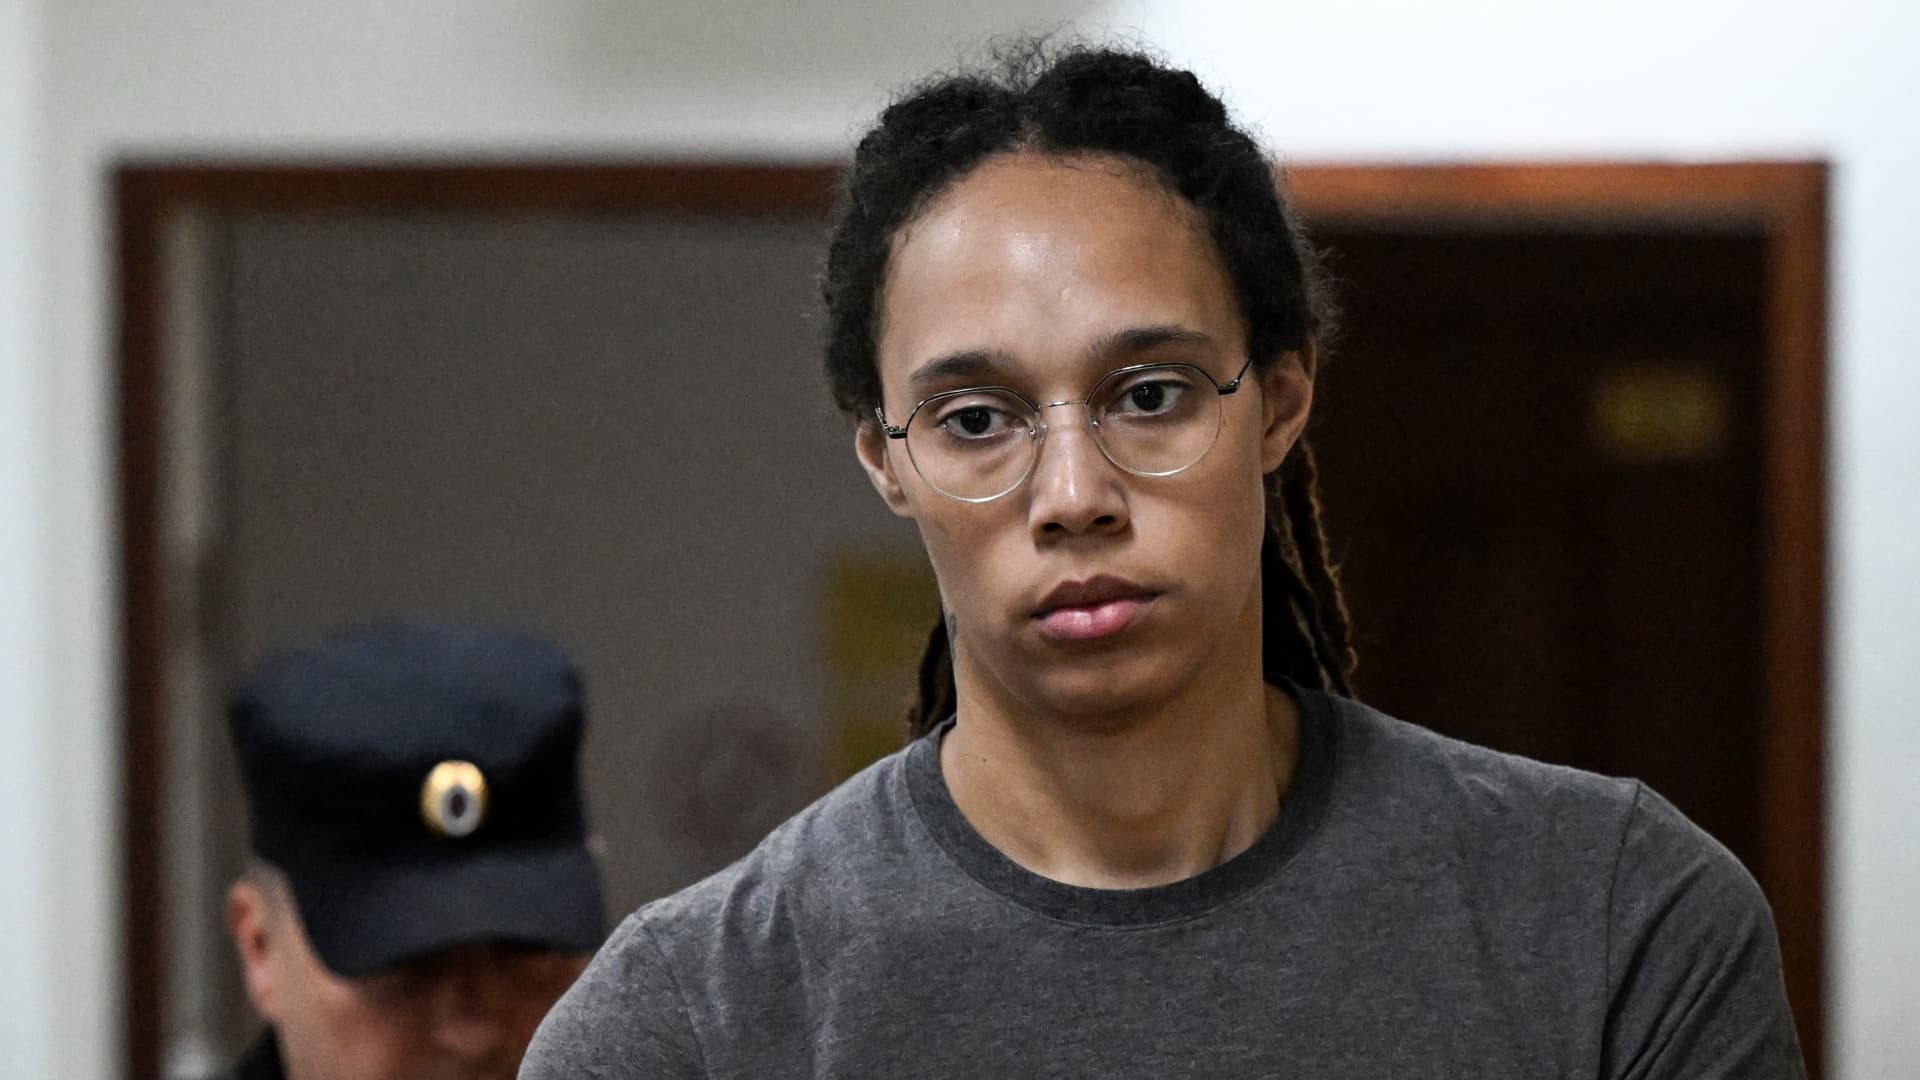 US' Women's National Basketball Association (NBA) basketball player Brittney Griner, who was detained at Moscow's Sheremetyevo airport and later charged with illegal possession of cannabis, stands inside a defendants' cage before a court hearing in Khimki outside Moscow, on August 4, 2022. 